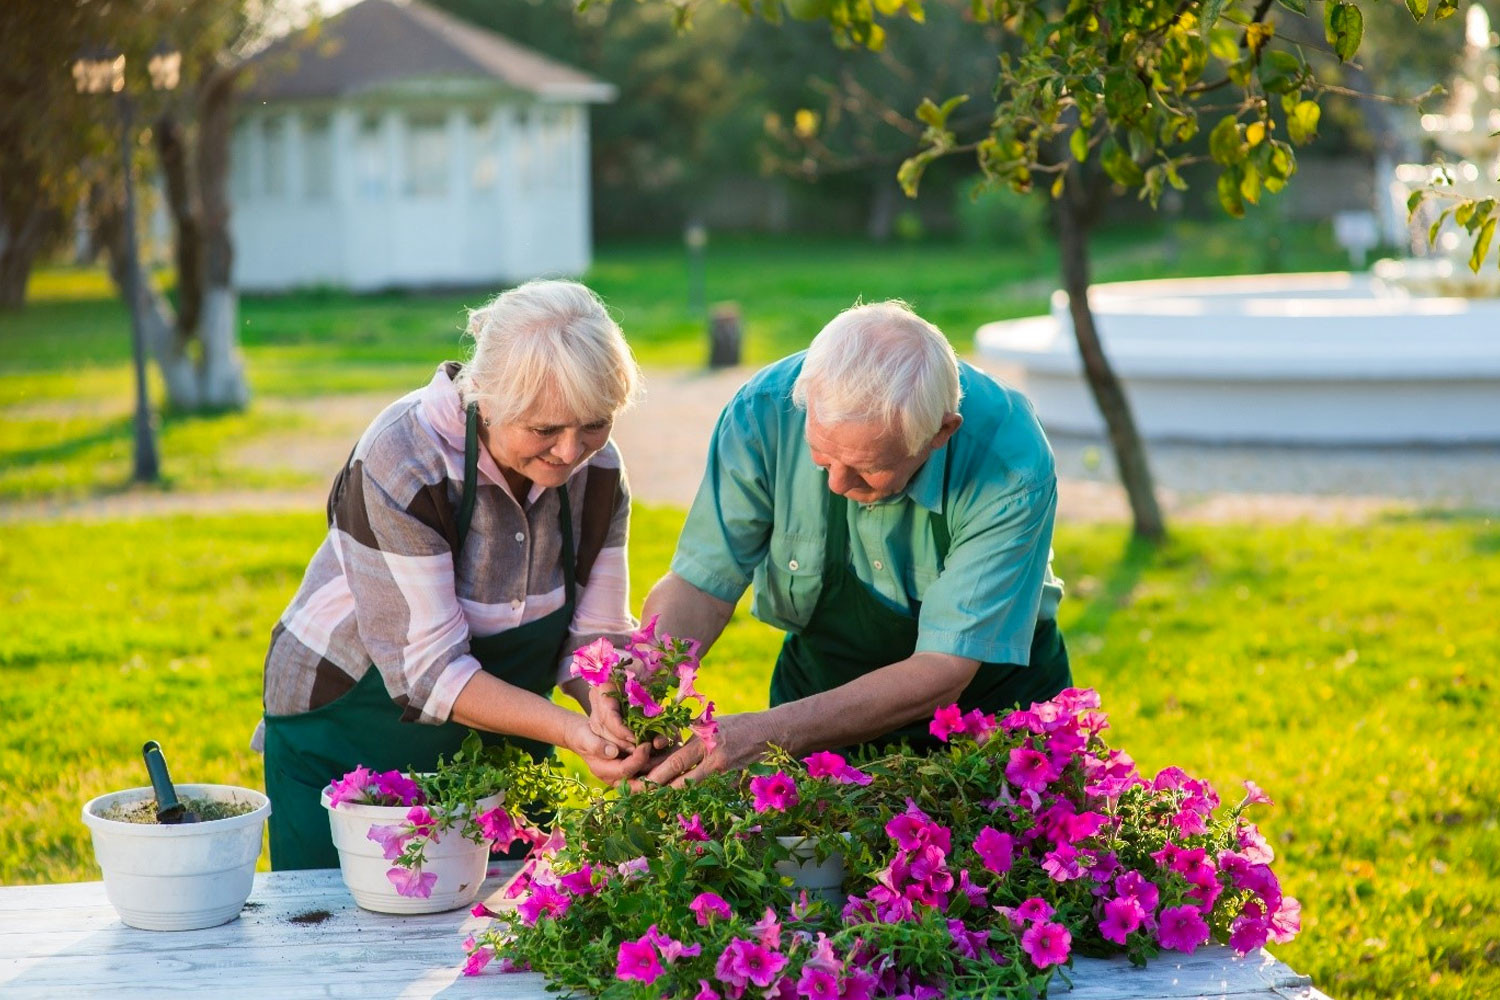 Summer Activities For Adults
 Outdoor and Indoor Summer Activities for Older Adults